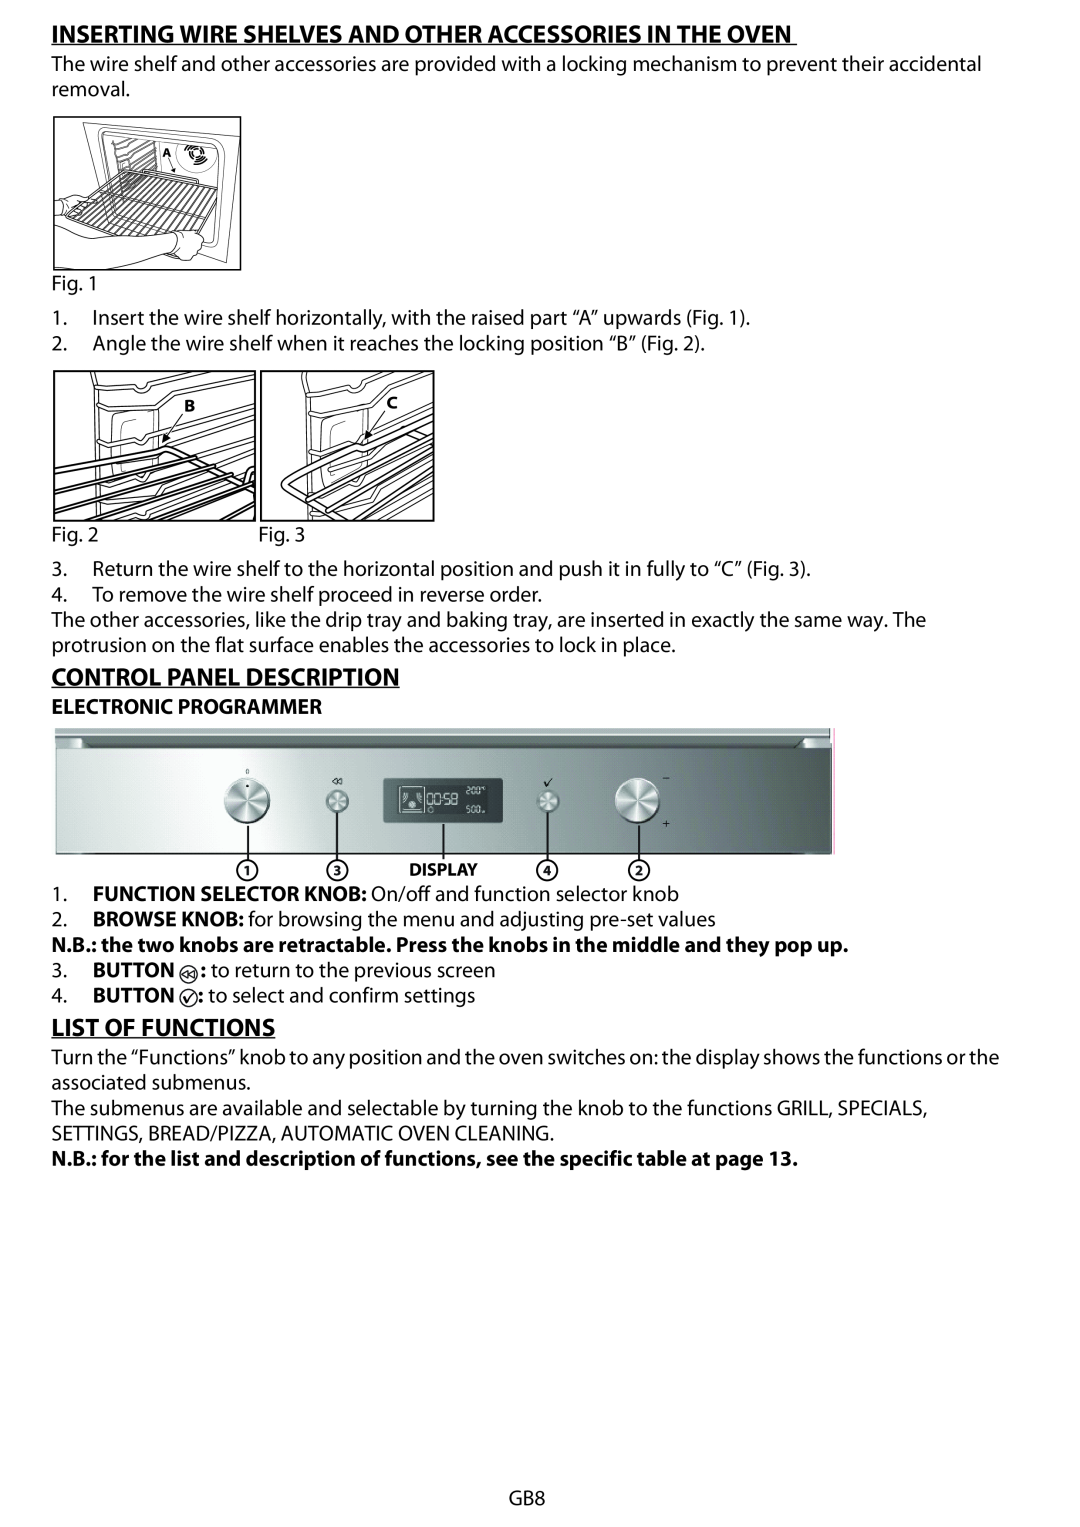 Whirlpool AKZM 788 Inserting Wire Shelves And Other Accessories In The Oven, Control Panel Description, List Of Functions 